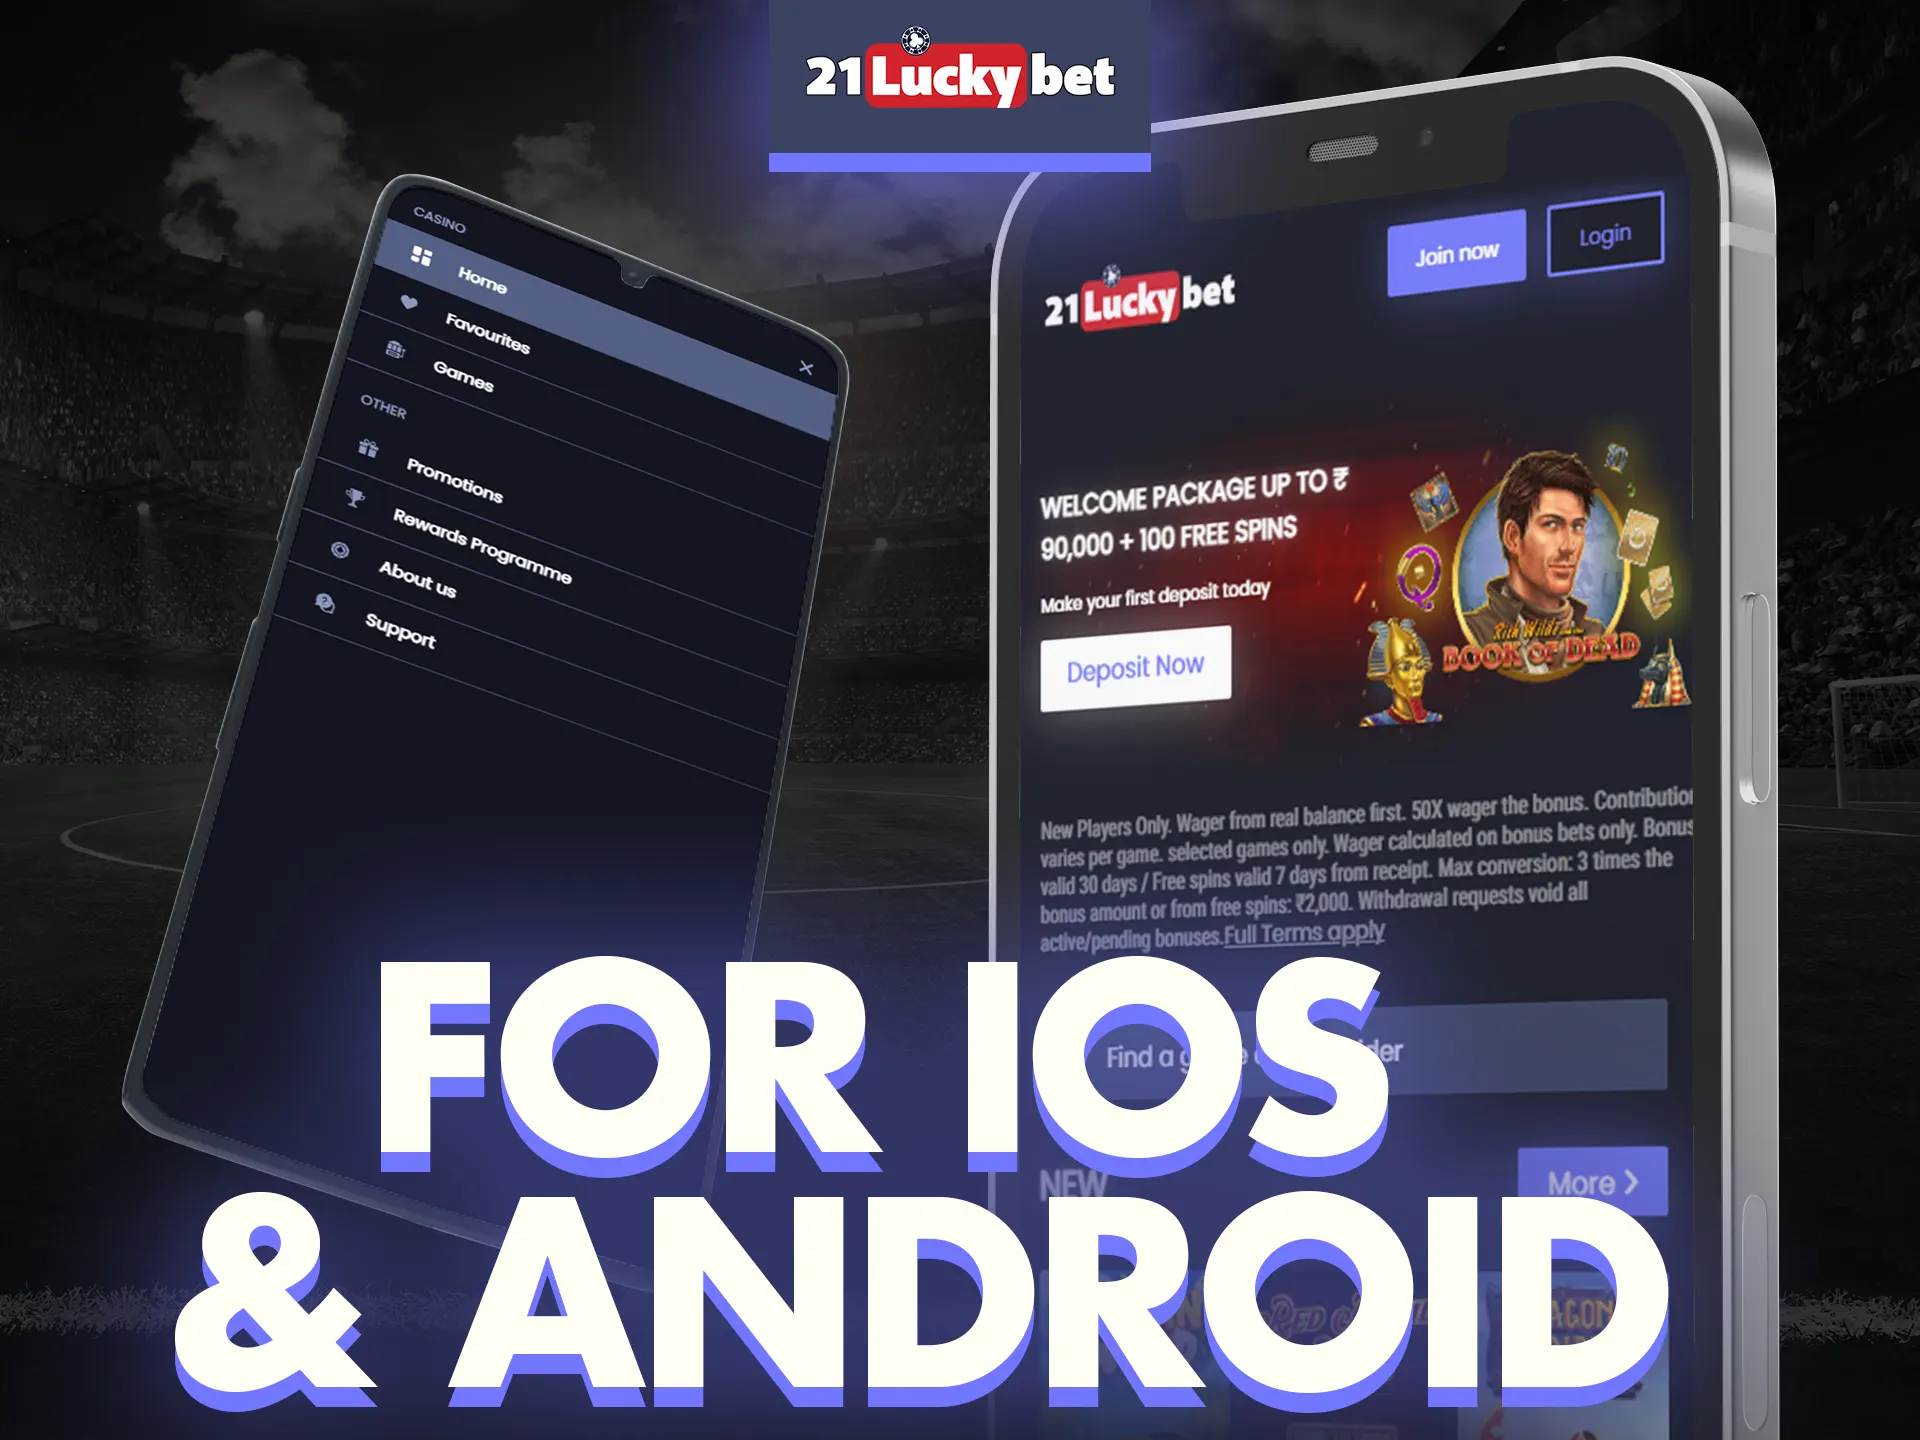 The 21luckybet app can be installed on Android and iOS phones.